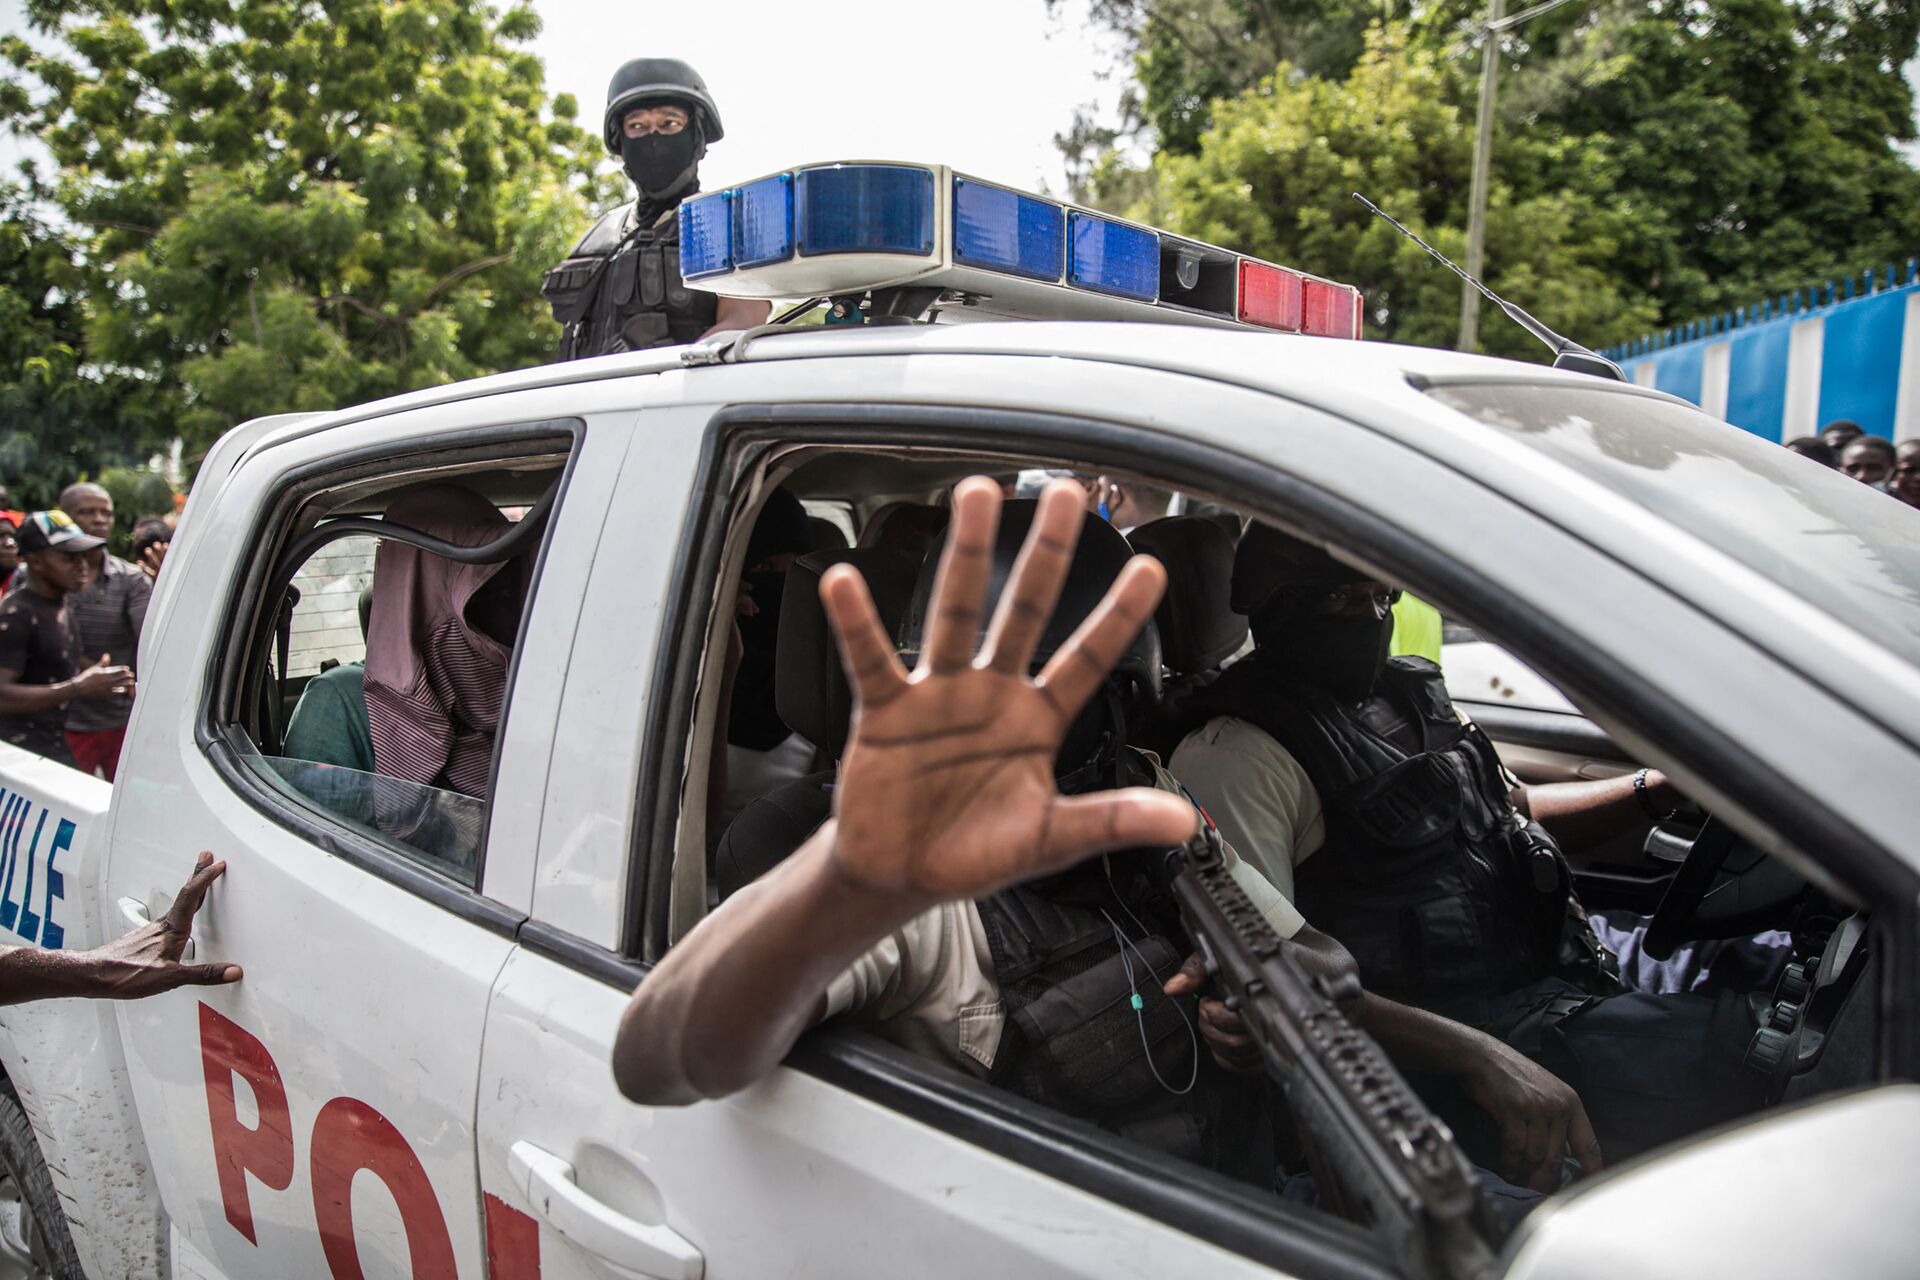 Two men, accused of being involved in the assassination of President Jovenel Moise, are being transported to the Petionville station in a police car in Port au Prince on July 8, 2021 - Sputnik International, 1920, 07.09.2021